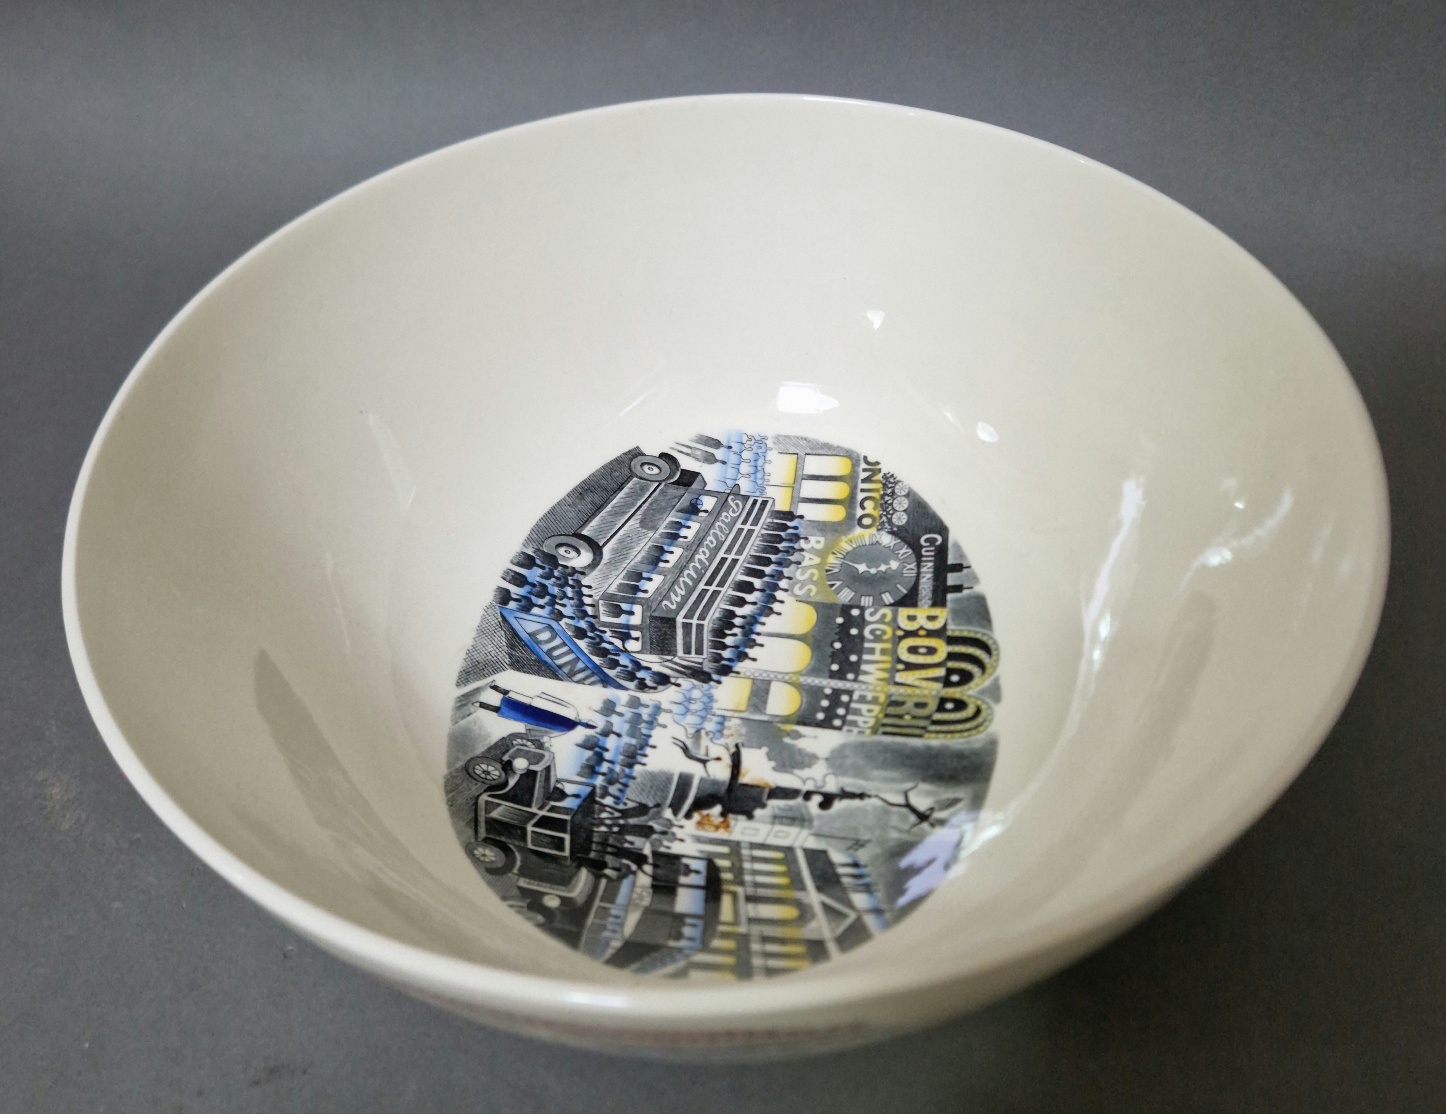 A 1975 Wedgwood Boat Race bowl designed by Eric Ravilious , limited edition no. 133/200, with box - Image 5 of 11